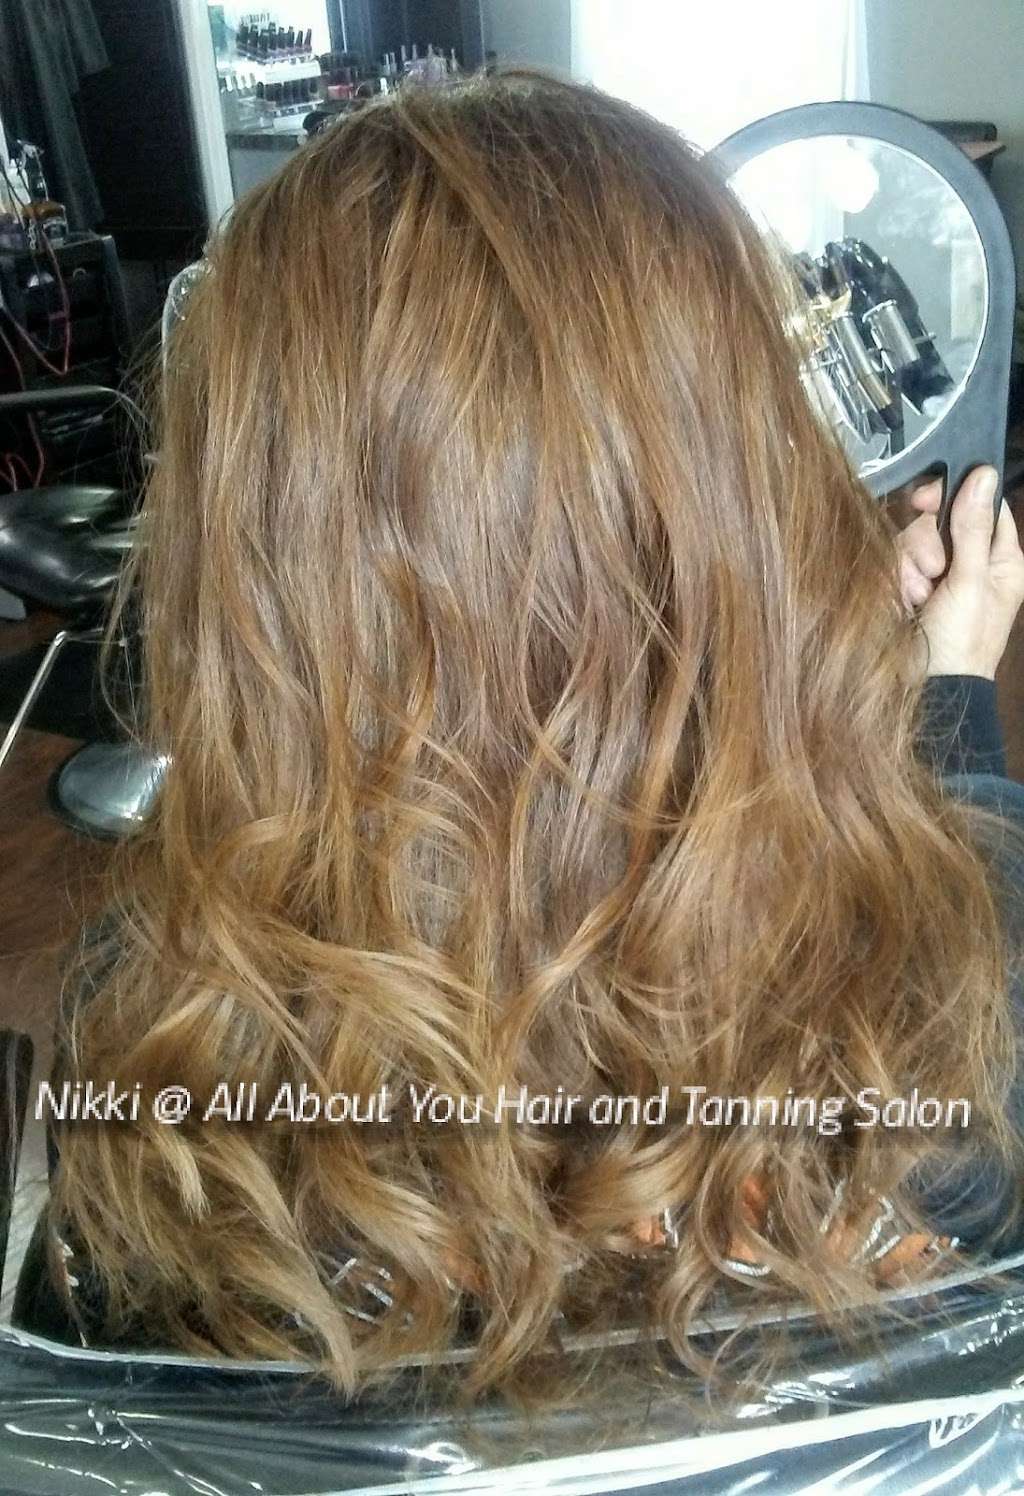 Nikki at All About You Hair Salon and Tanning | 9075 1200 N, De Motte, IN 46310 | Phone: (765) 761-7119